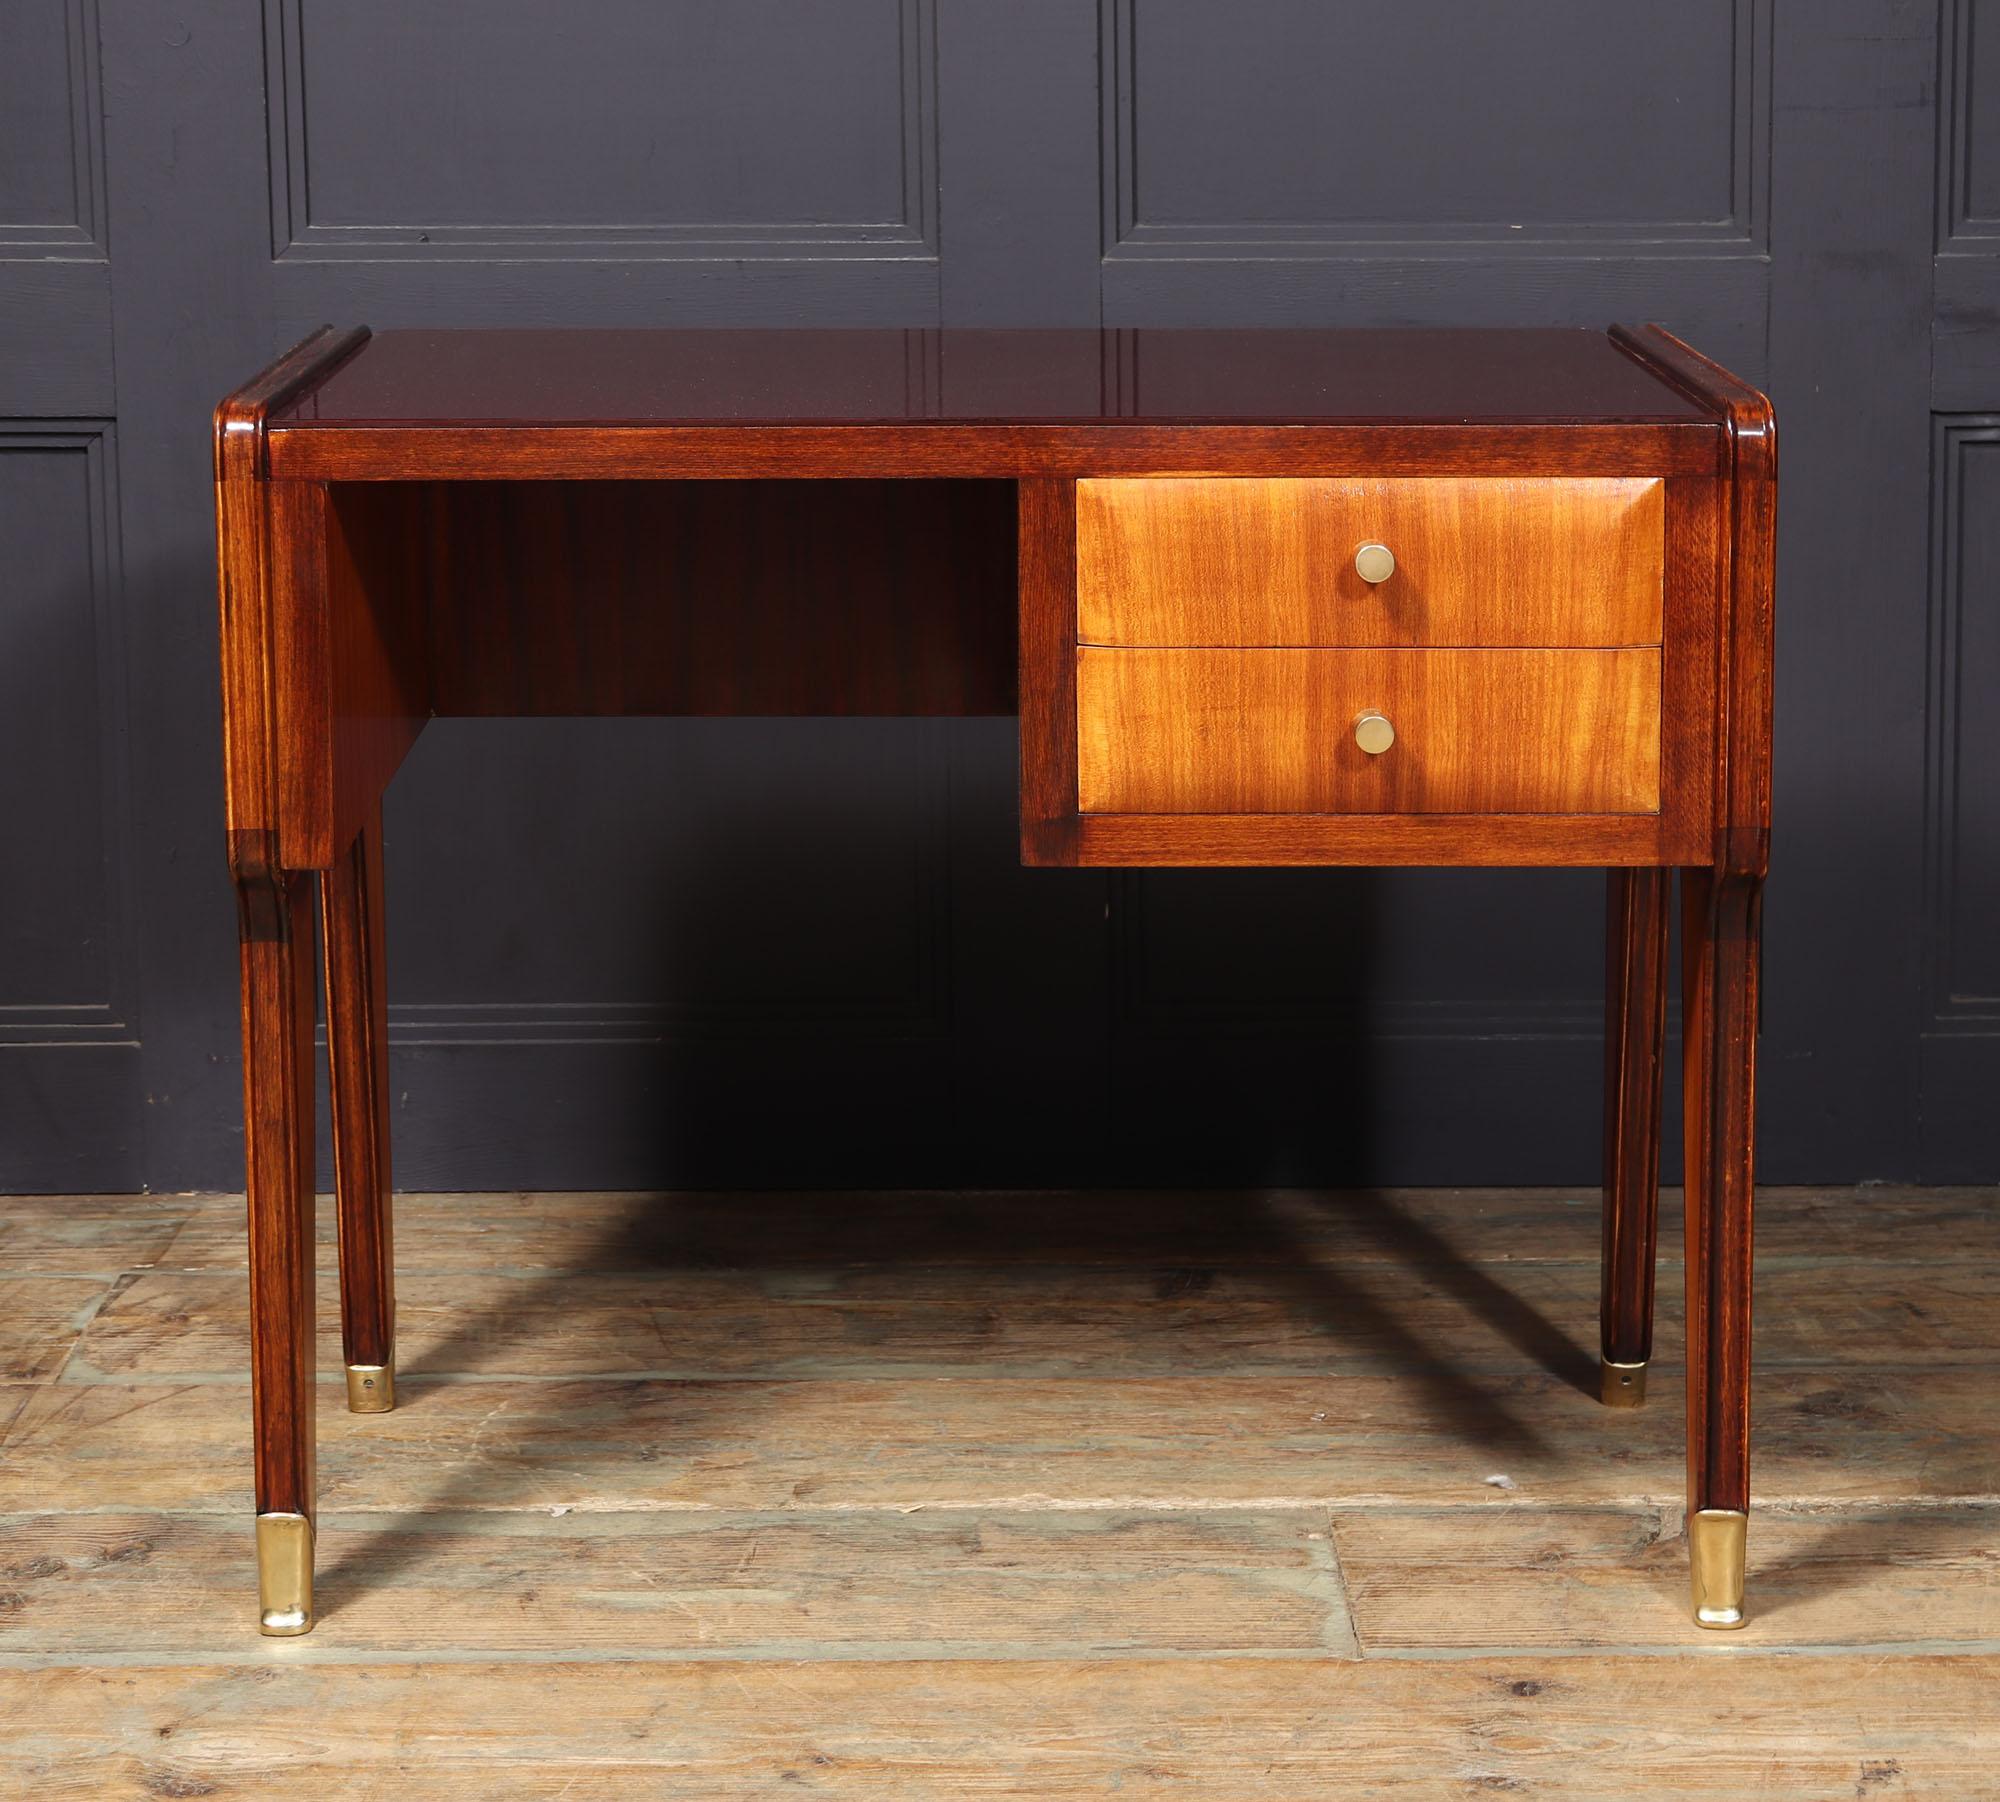 DESK BY VITTORIO DASSI
Introducing a stunning piece of mid-century Italian design, the desk created by renowned craftsman Vitorrio Dassi in the 1950s is a true gem. With its minimalist aesthetic, this desk features two functional drawers and a